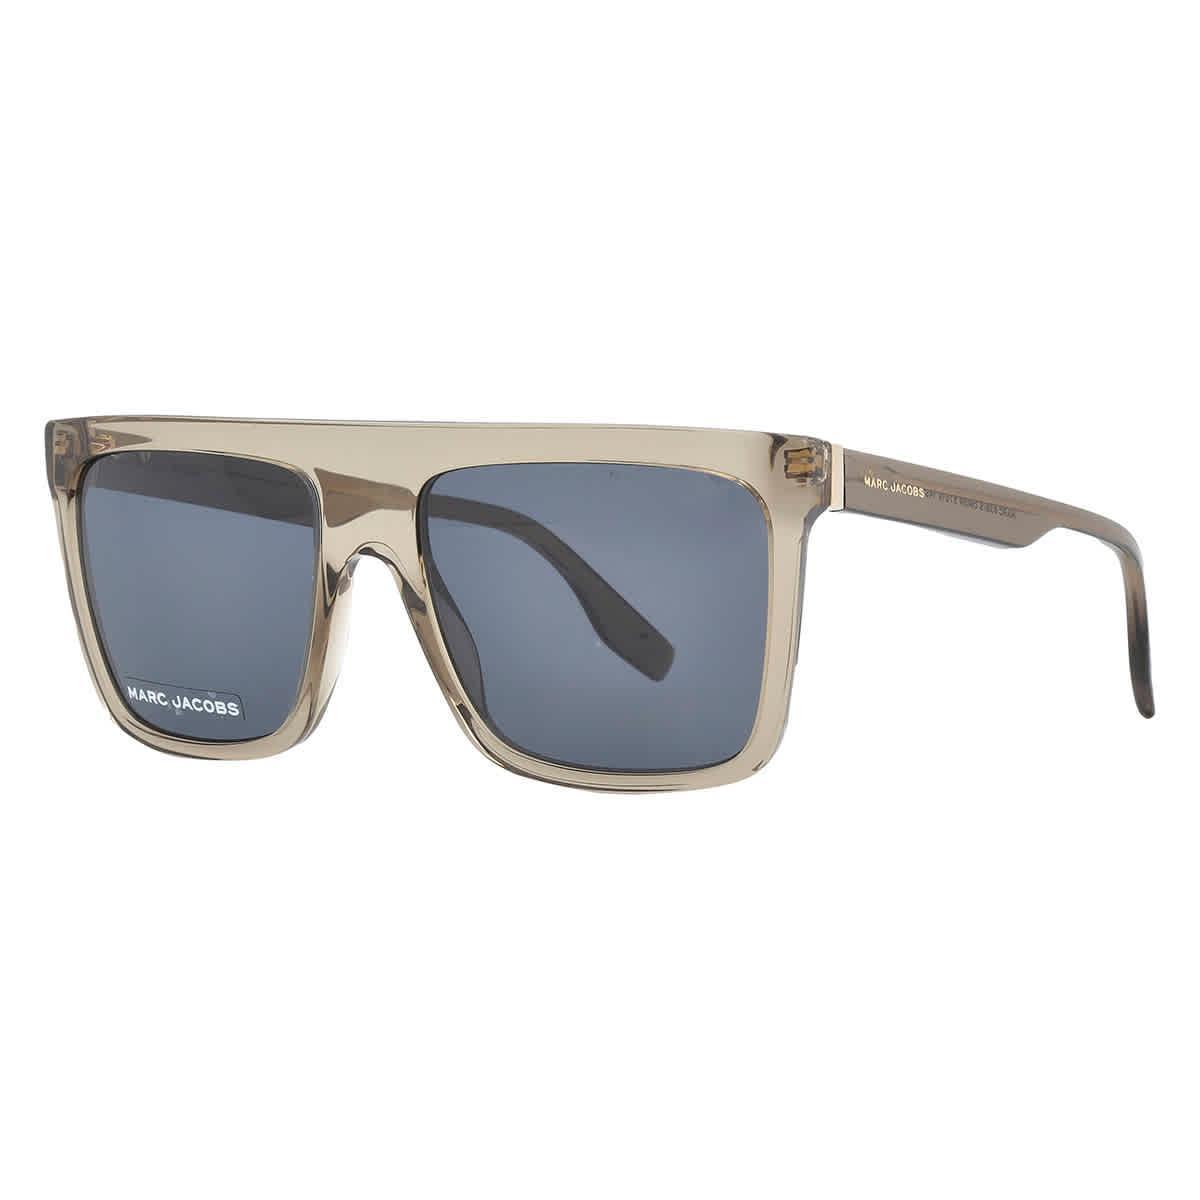 Marc Jacobs 57mm Flat Top Sunglasses Product Image